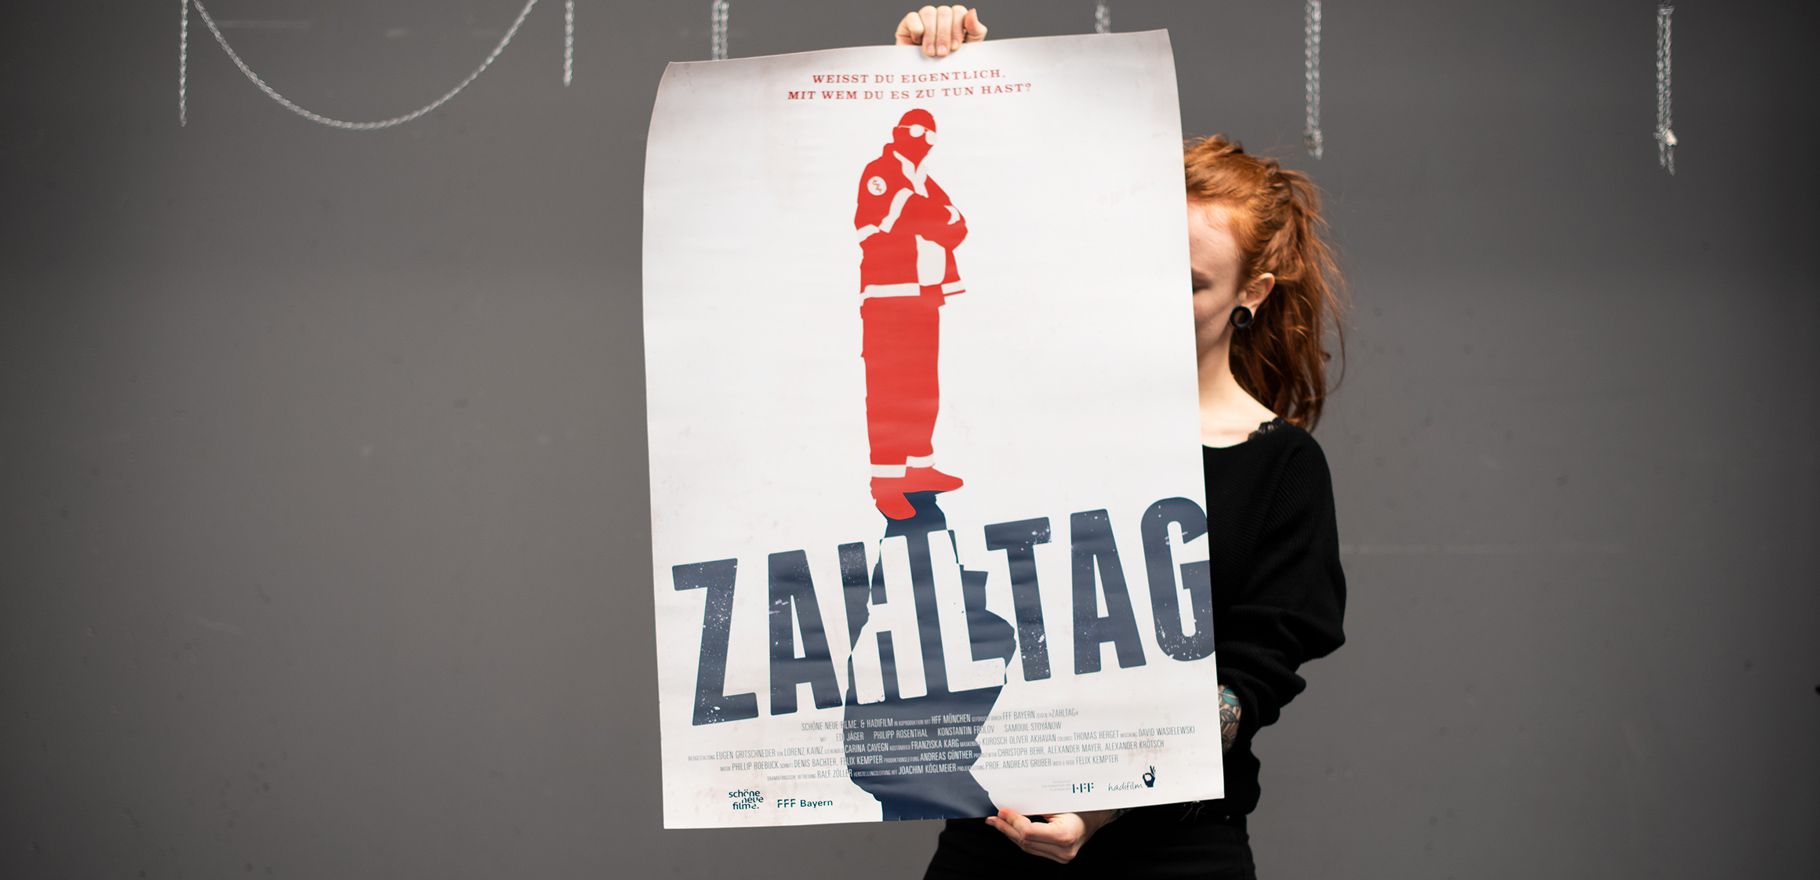 Photography of Nina Lesznik holding a lange film poster of her production design project "Zahltag"